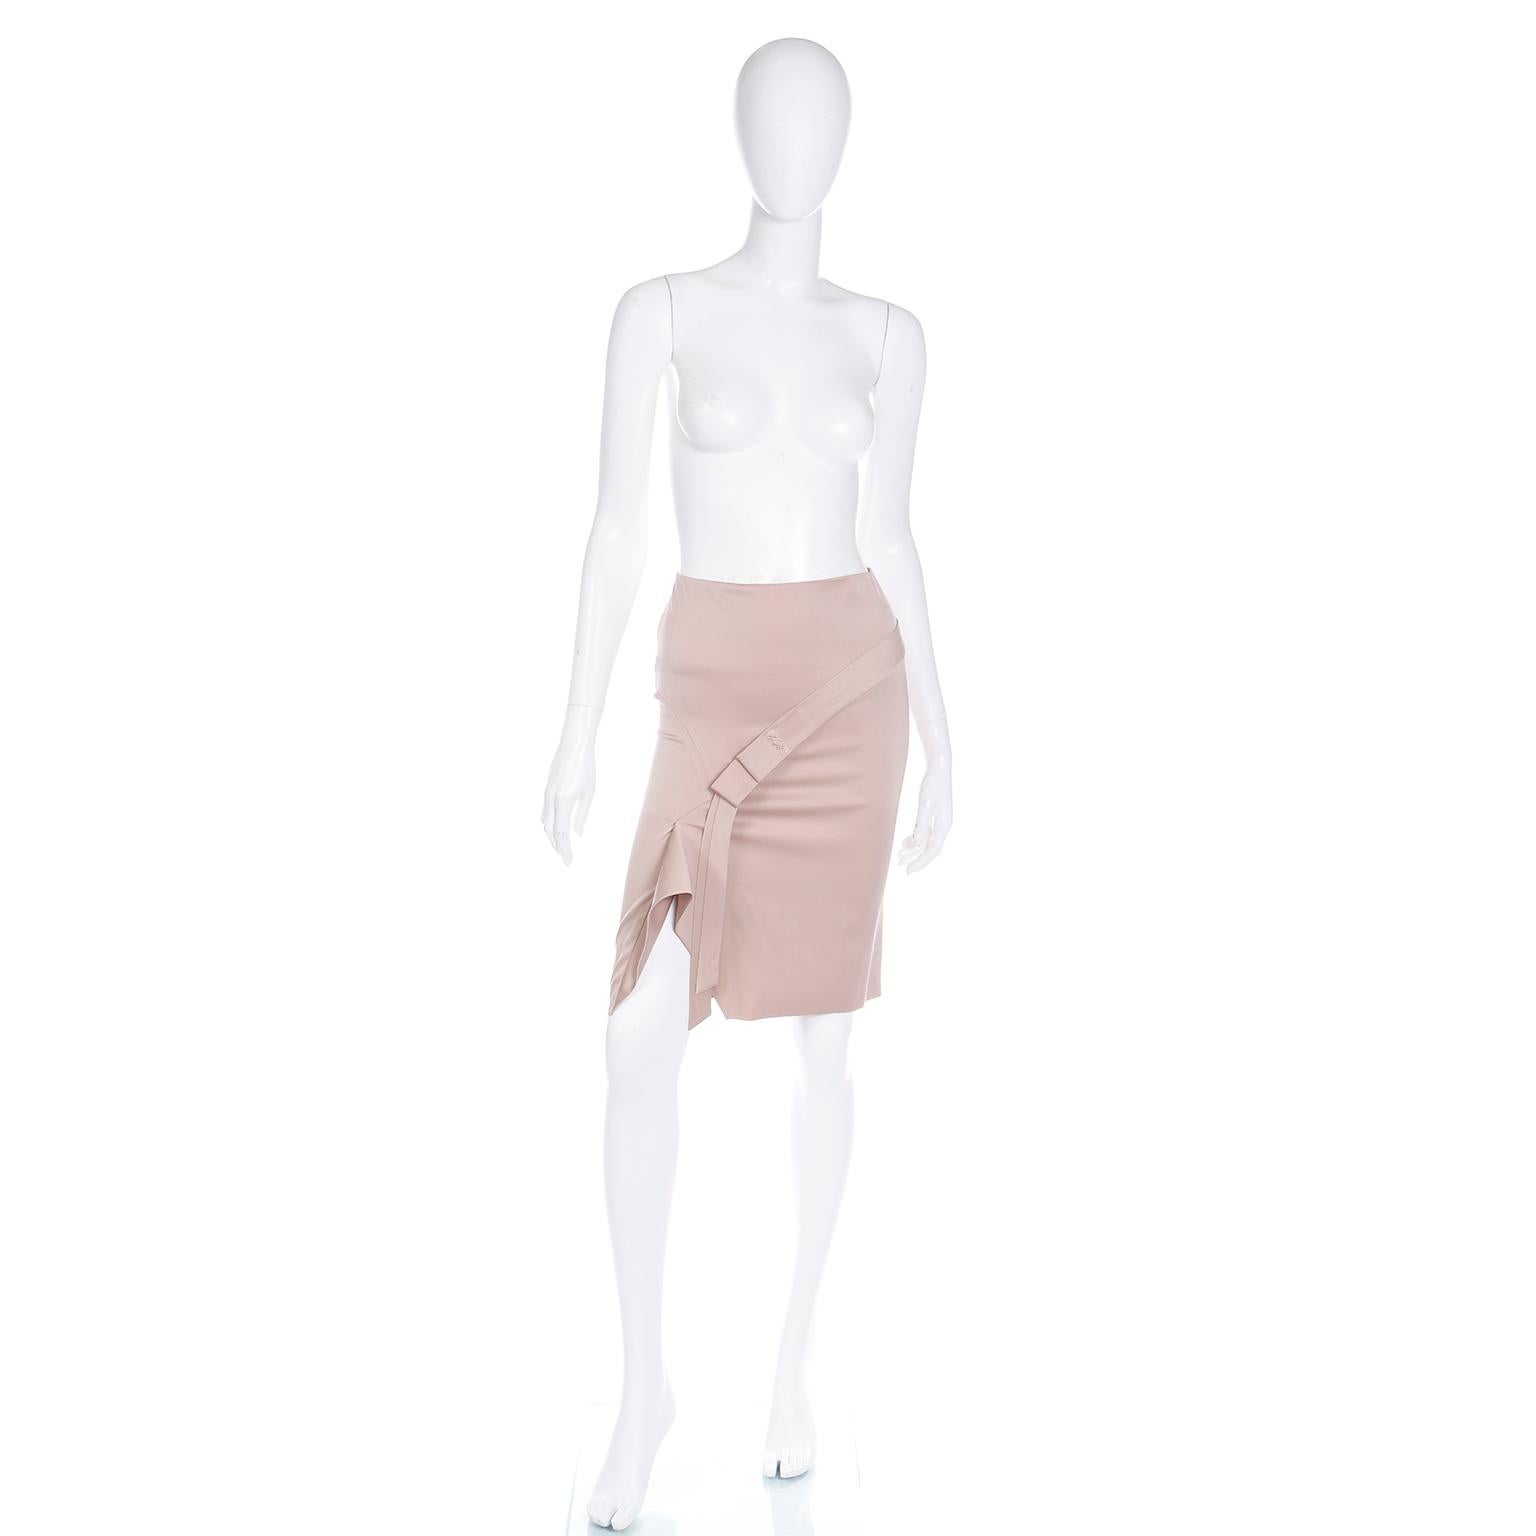 This incredible ultra modern looking Tom Ford for Gucci 2000s skirt is made of a luxurious silk blend in a pale gold with pink undertones.The skirt has a slim fit and an interesting bow detail. Its asymmetrical design is both classic and on trend,